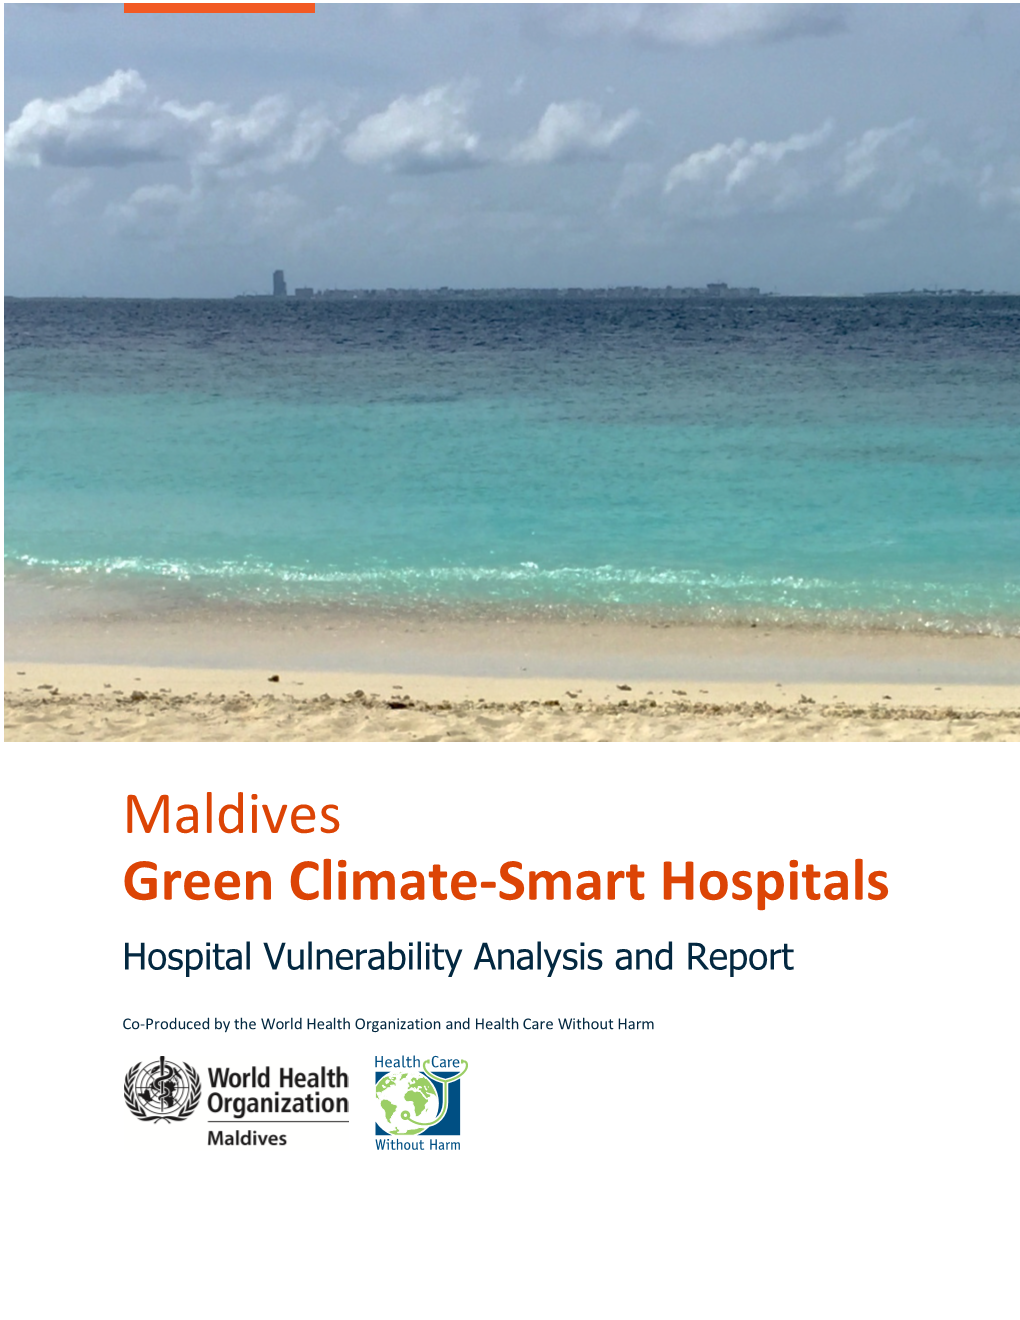 Maldives Green Climate-Smart Hospitals Hospital Vulnerability Analysis and Report